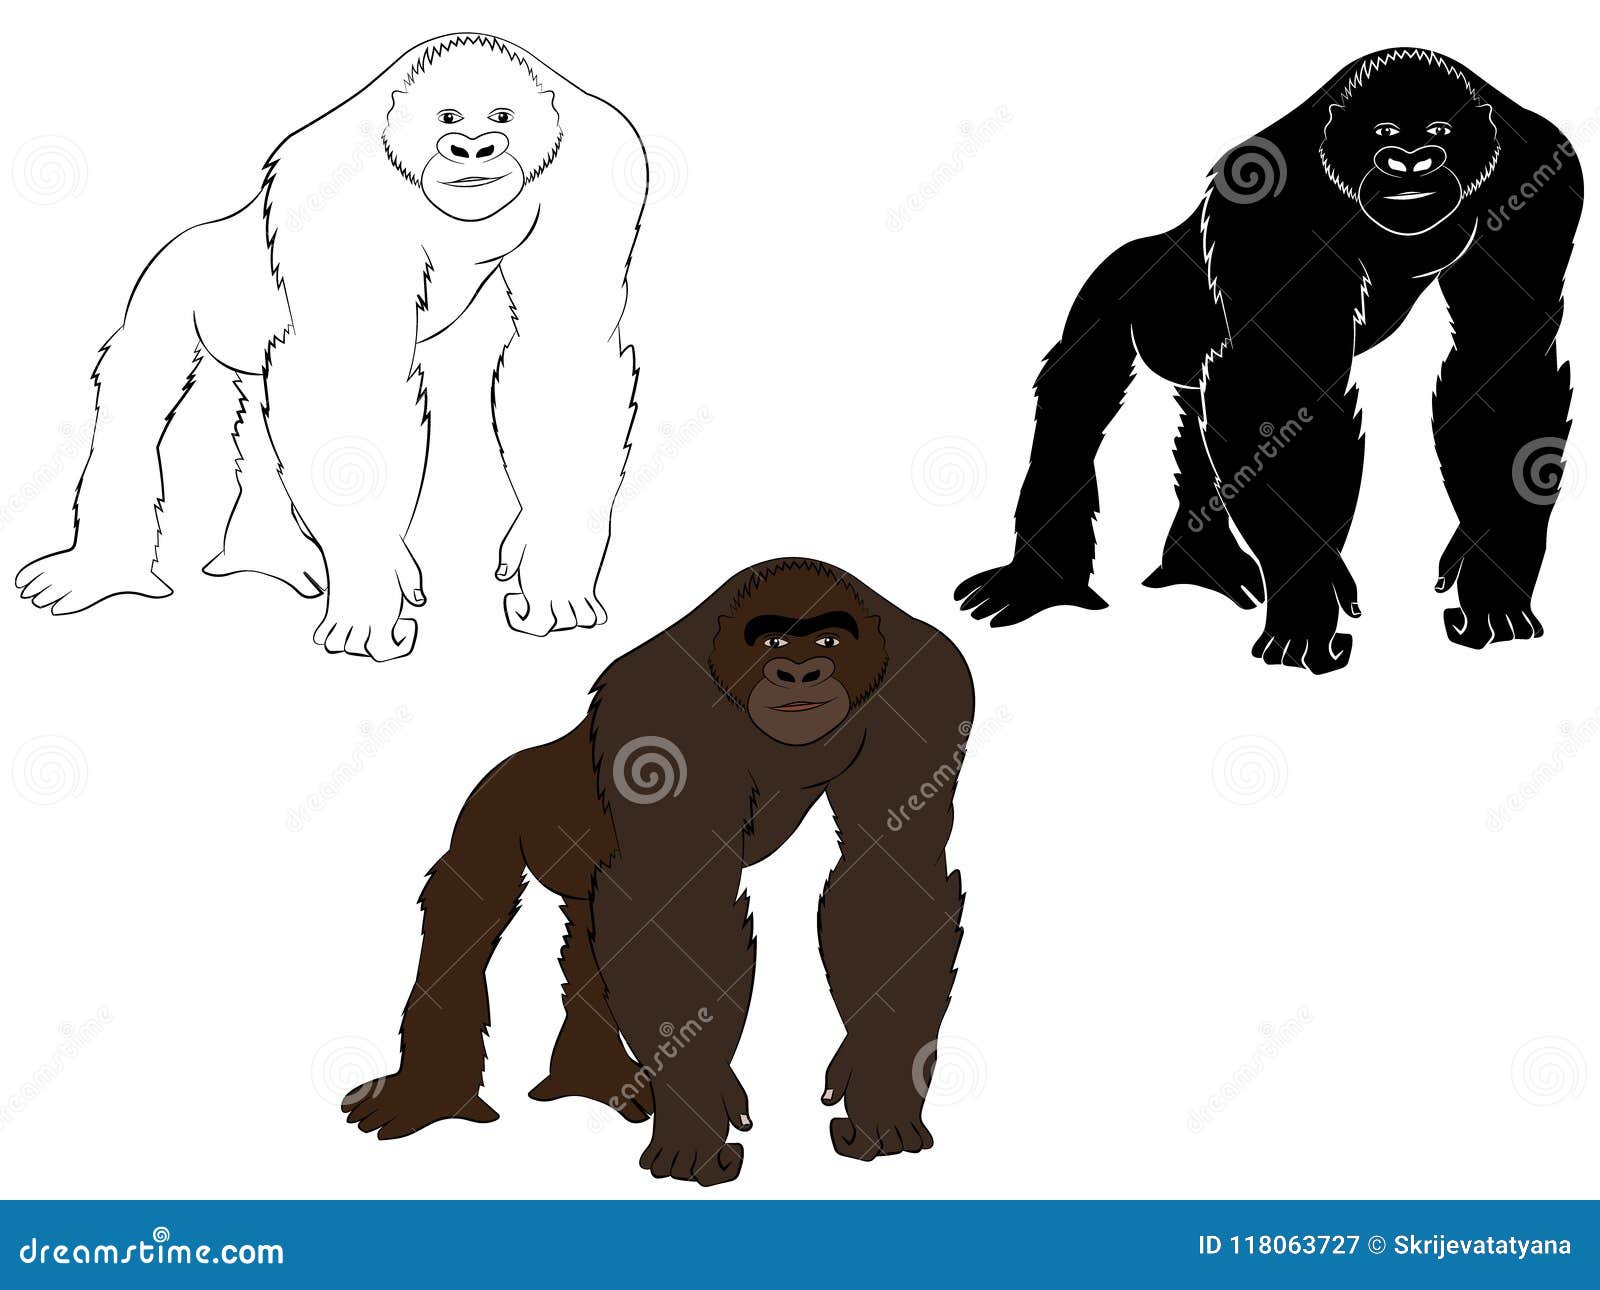 Gorilla in Color, Black and White and Outline Illustration Stock ...